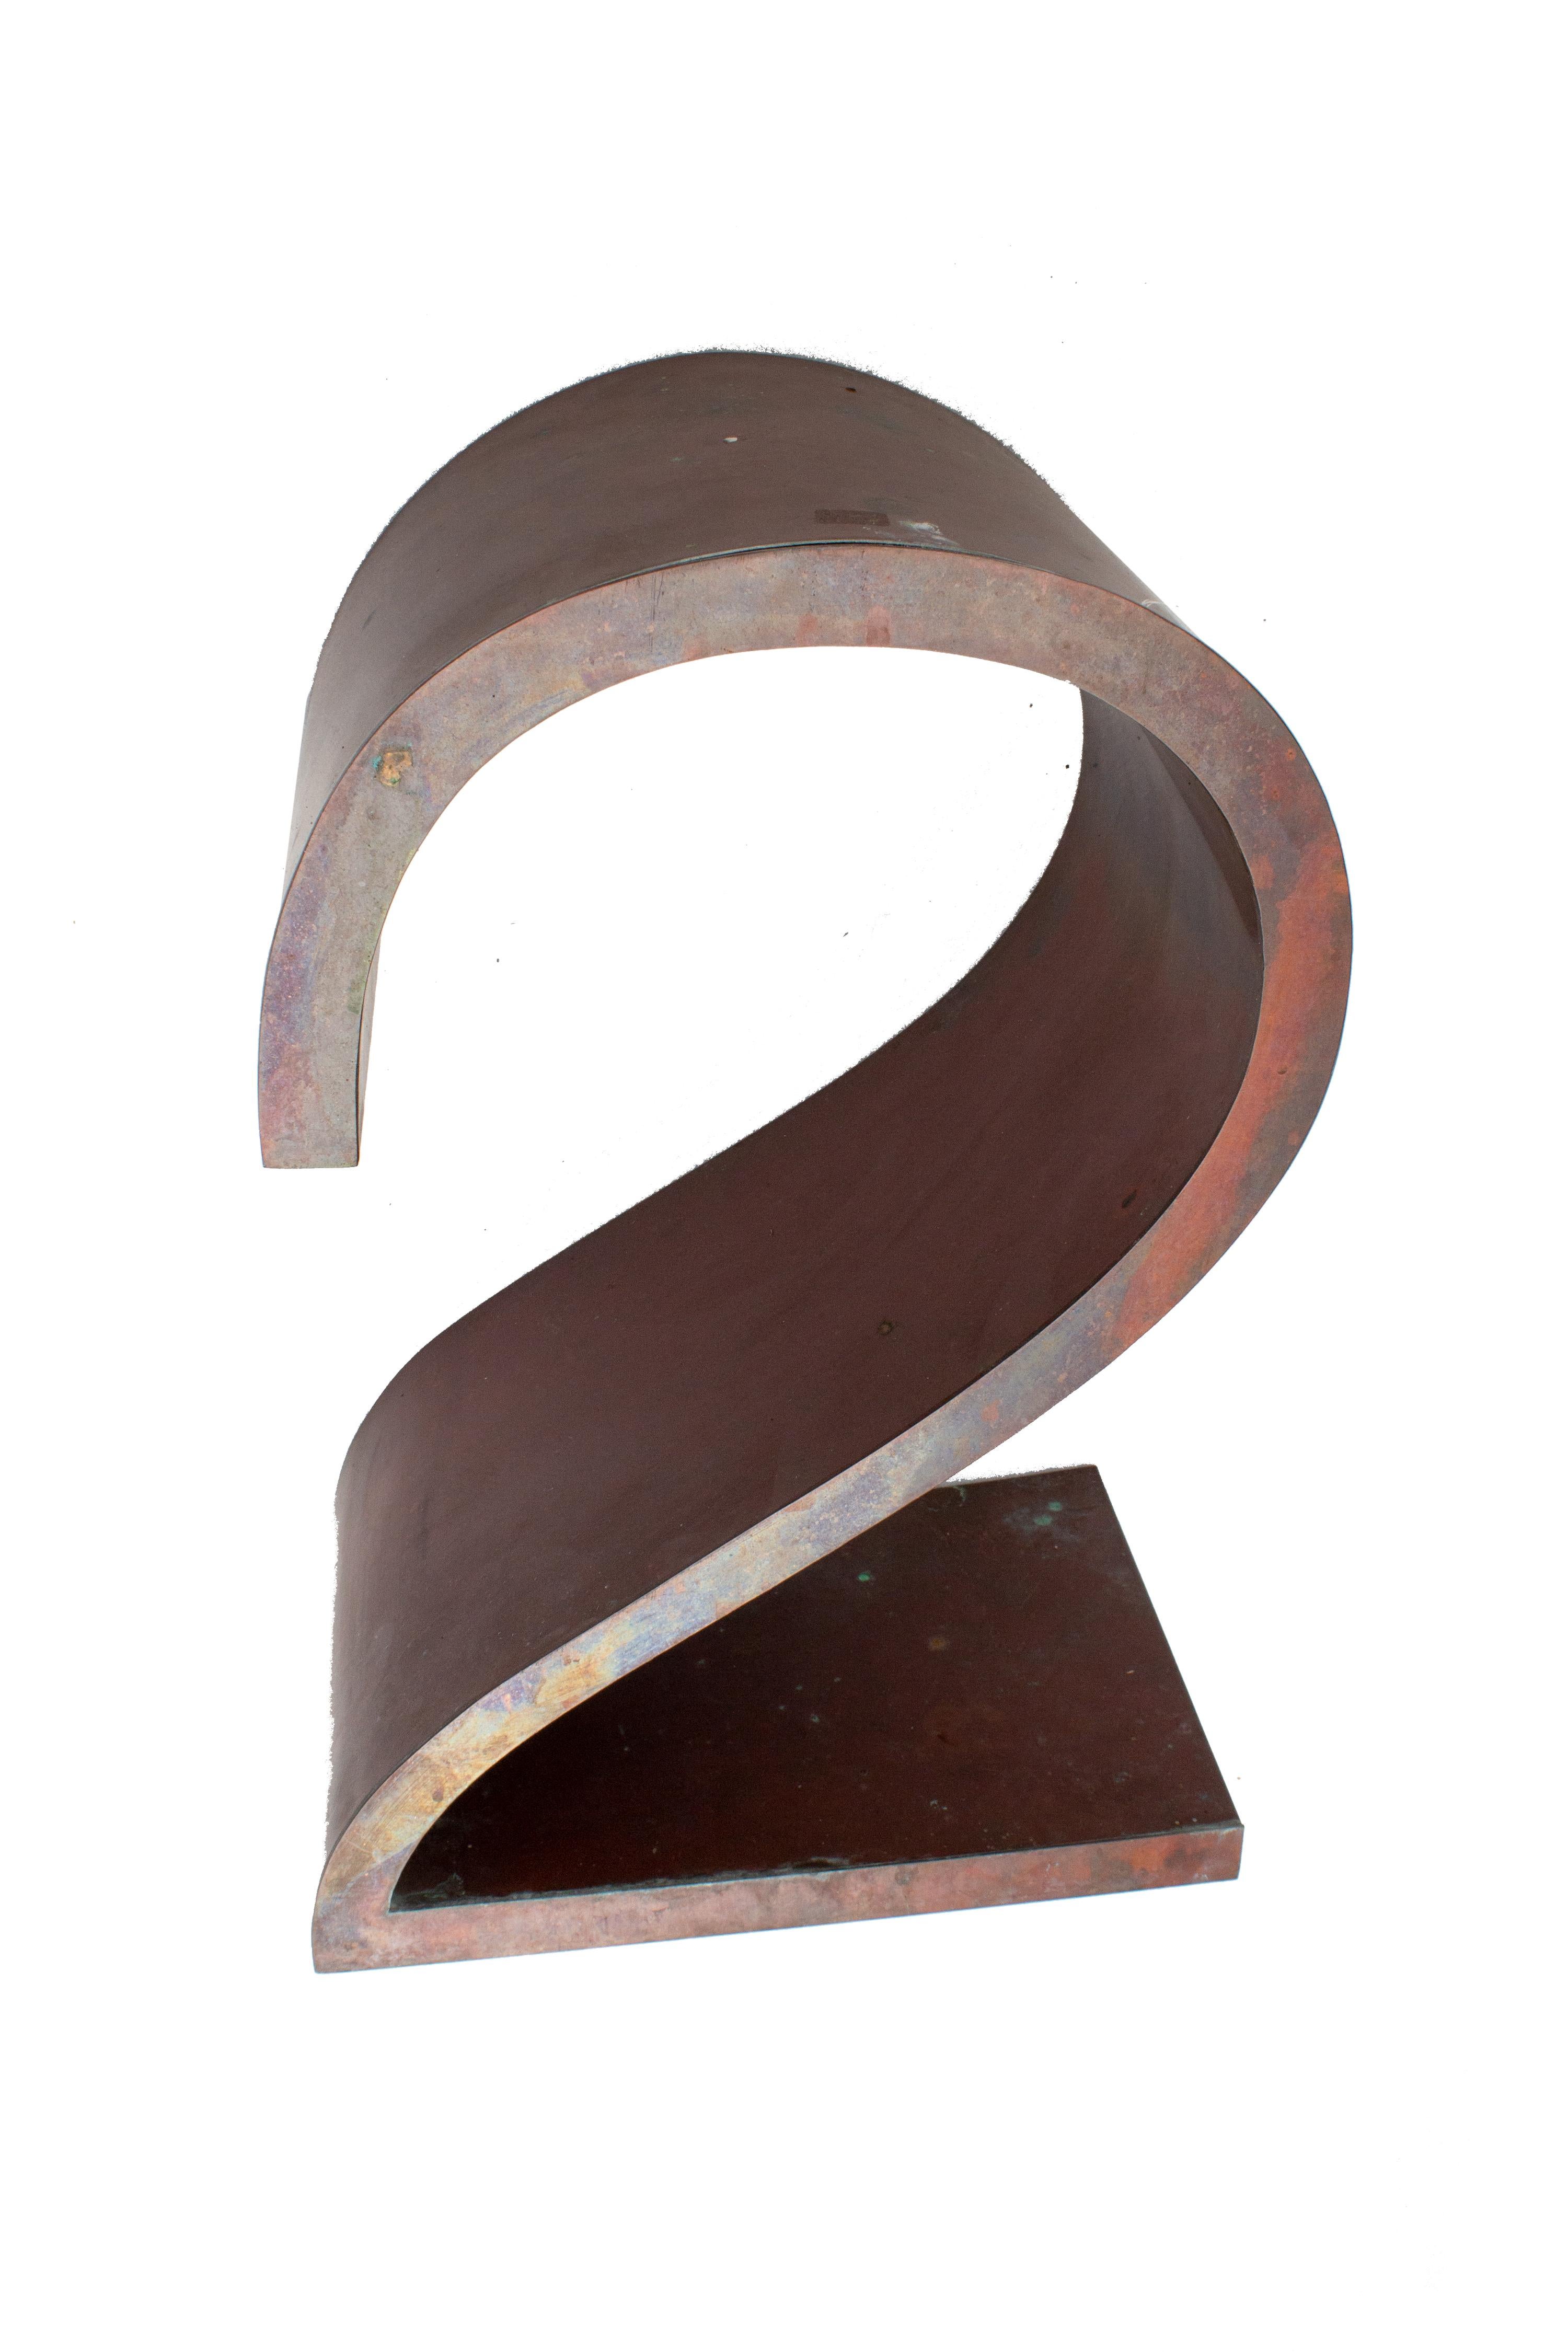 Big rustic sign number two in copper, Made in Sweden.
Big and beautiful number 2 is up for sale. For those who appreciate a good story behind No 2, here it comes. The Avis slogan “We Try Harder” ads were an instant hit. Within a year, Avis went